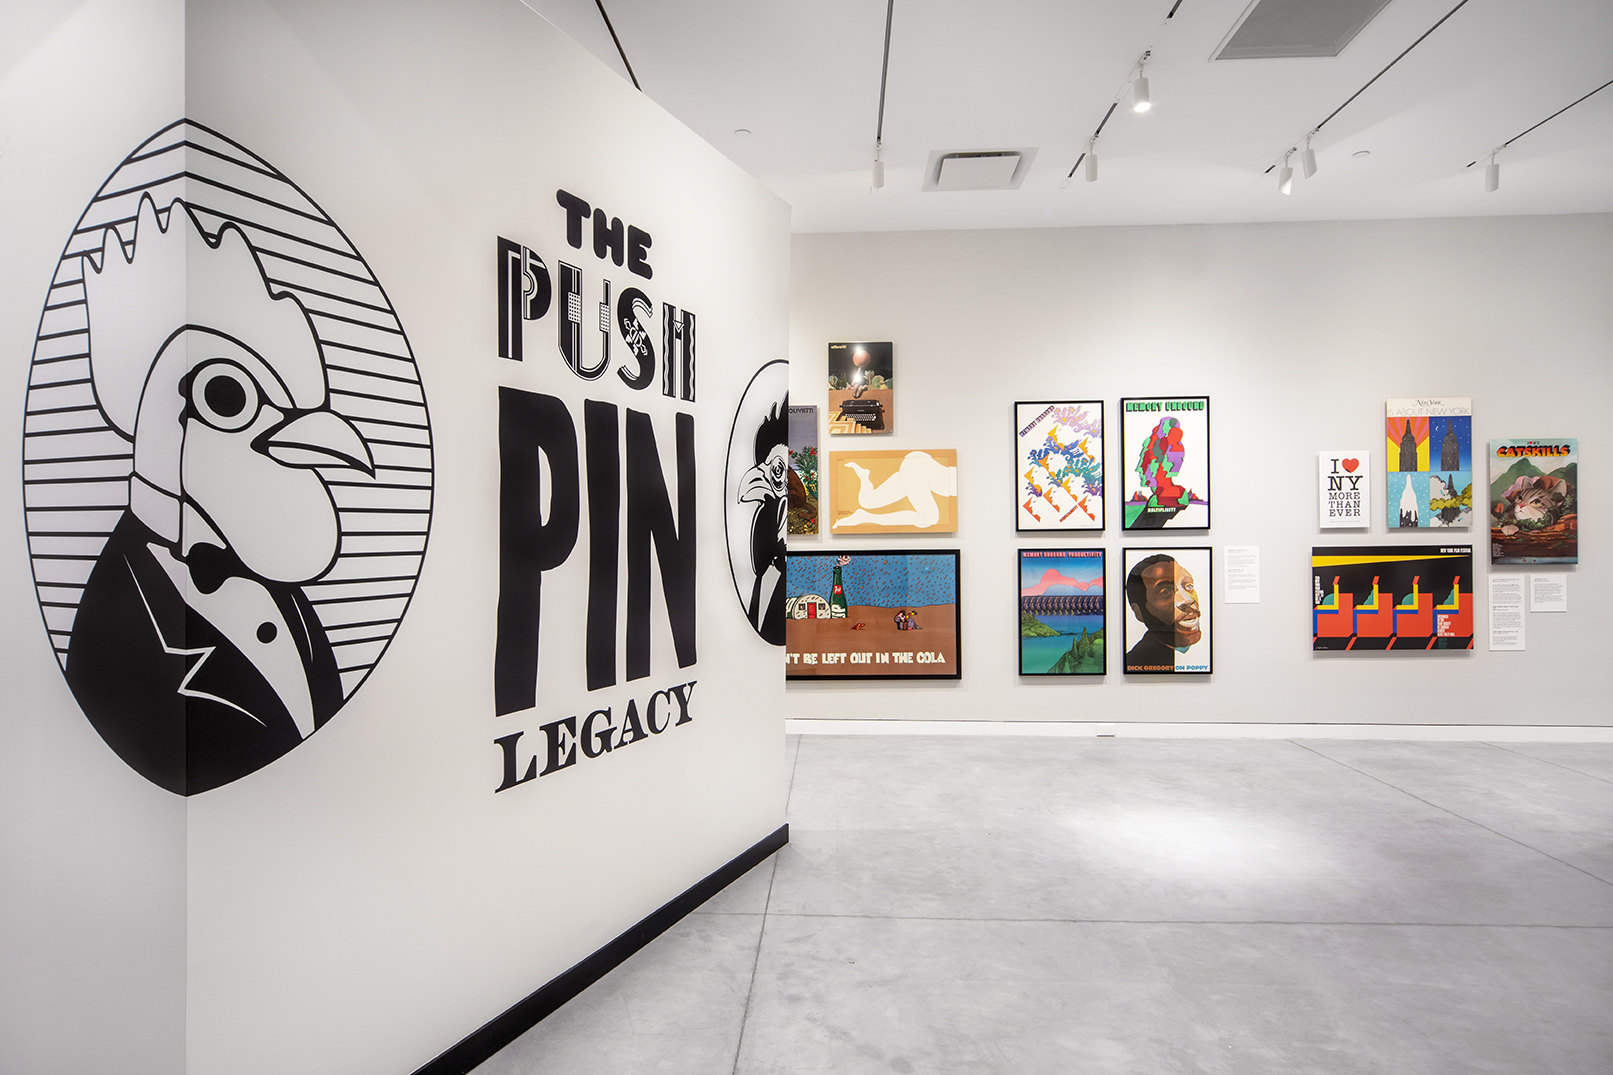 Peering into the Push Pin show by a chicken graphic dressed in a tux, directly ahead a white wall of colorful framed posters.